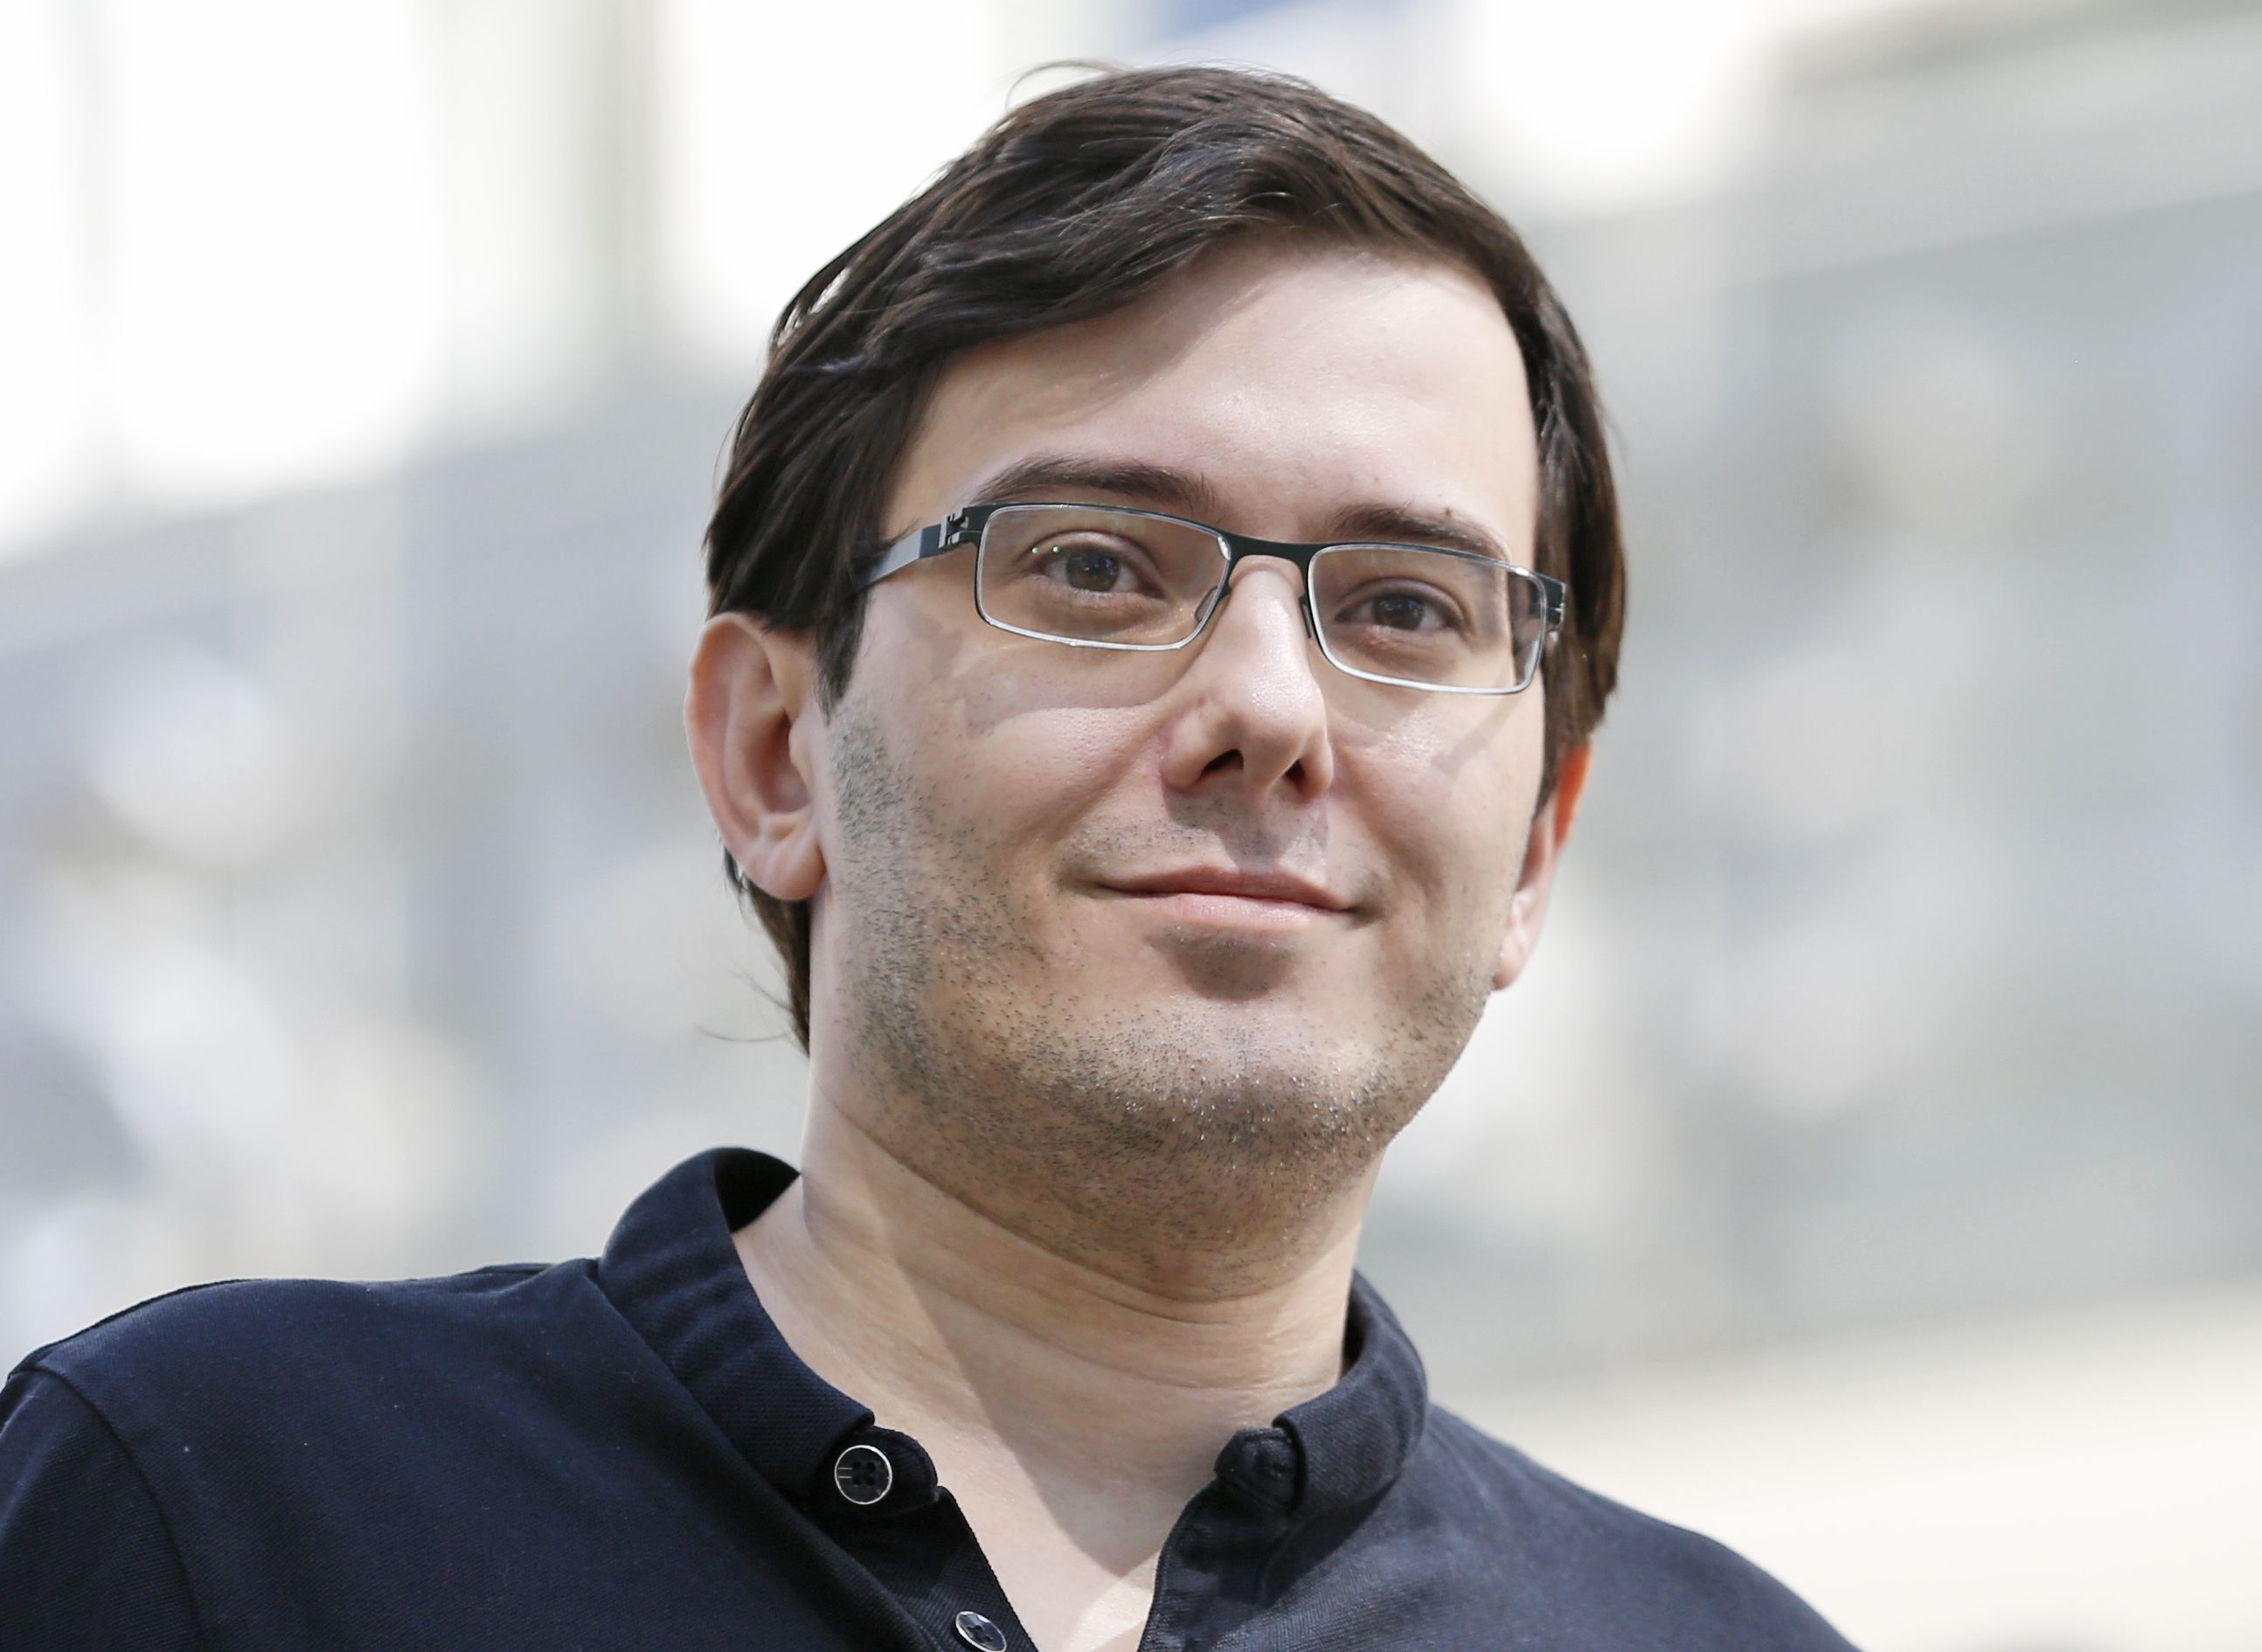 Convicted ‘Pharma Bro’ Martin Shkreli’s $2 Million Wu-Tang Clan Album Could Now Get Auctioned Off